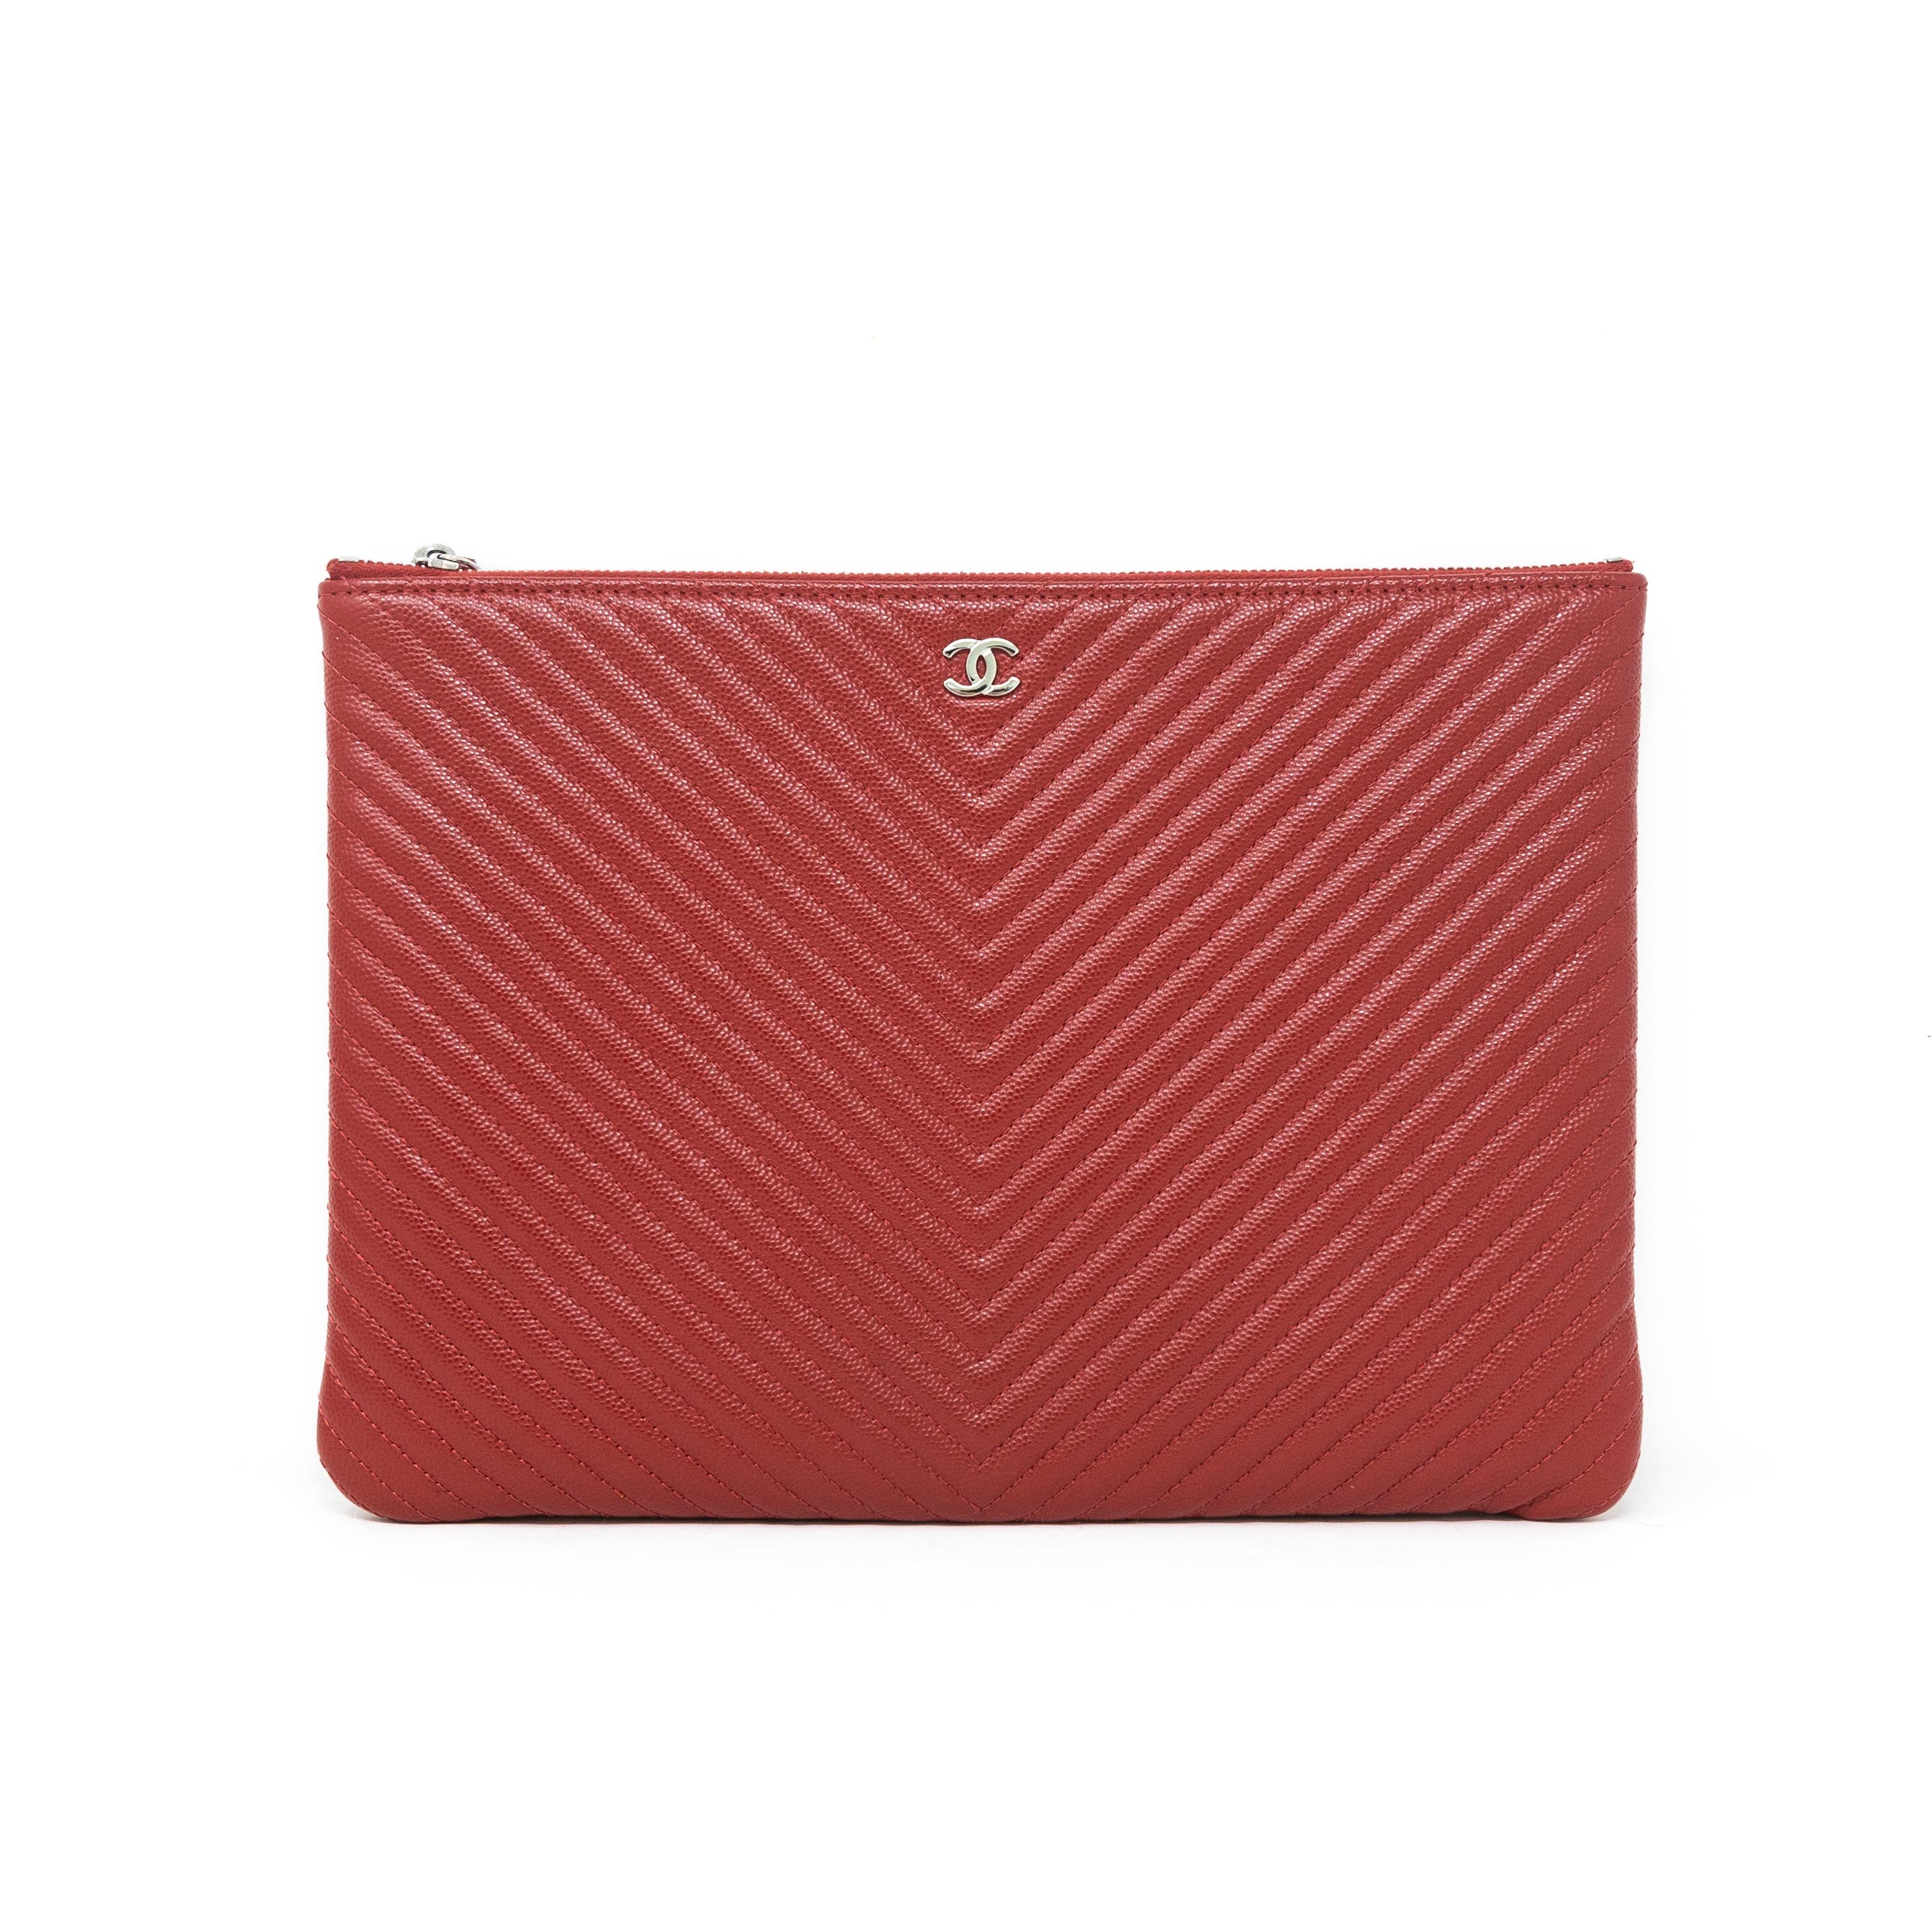 Chanel Red Medium O Case Pouch